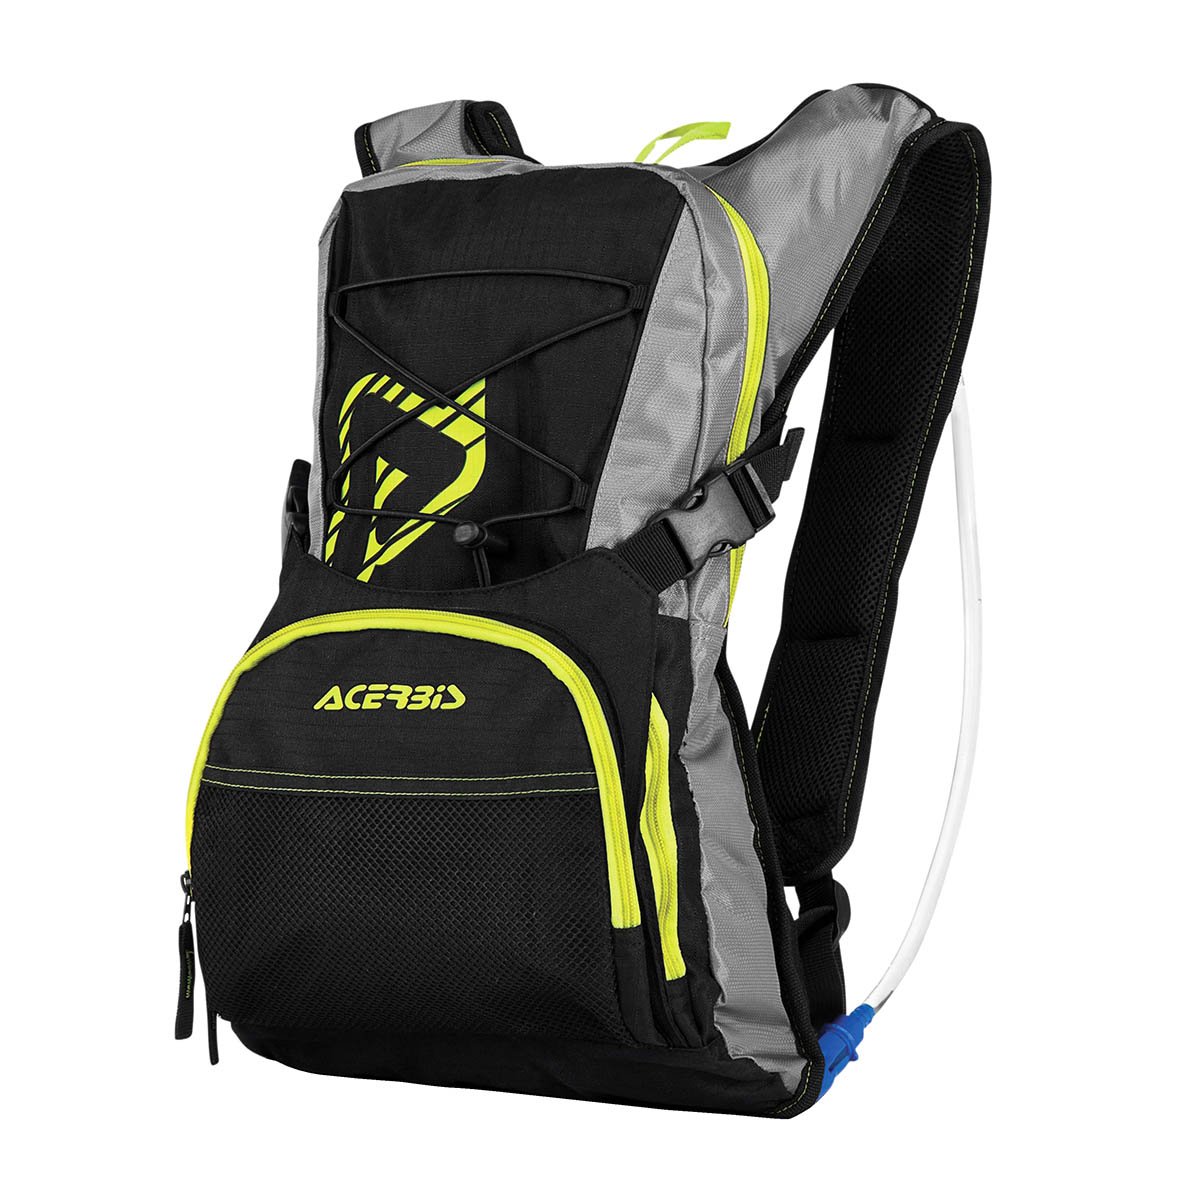 Acerbis Hydration Pack H2O Black/Fluo Yellow